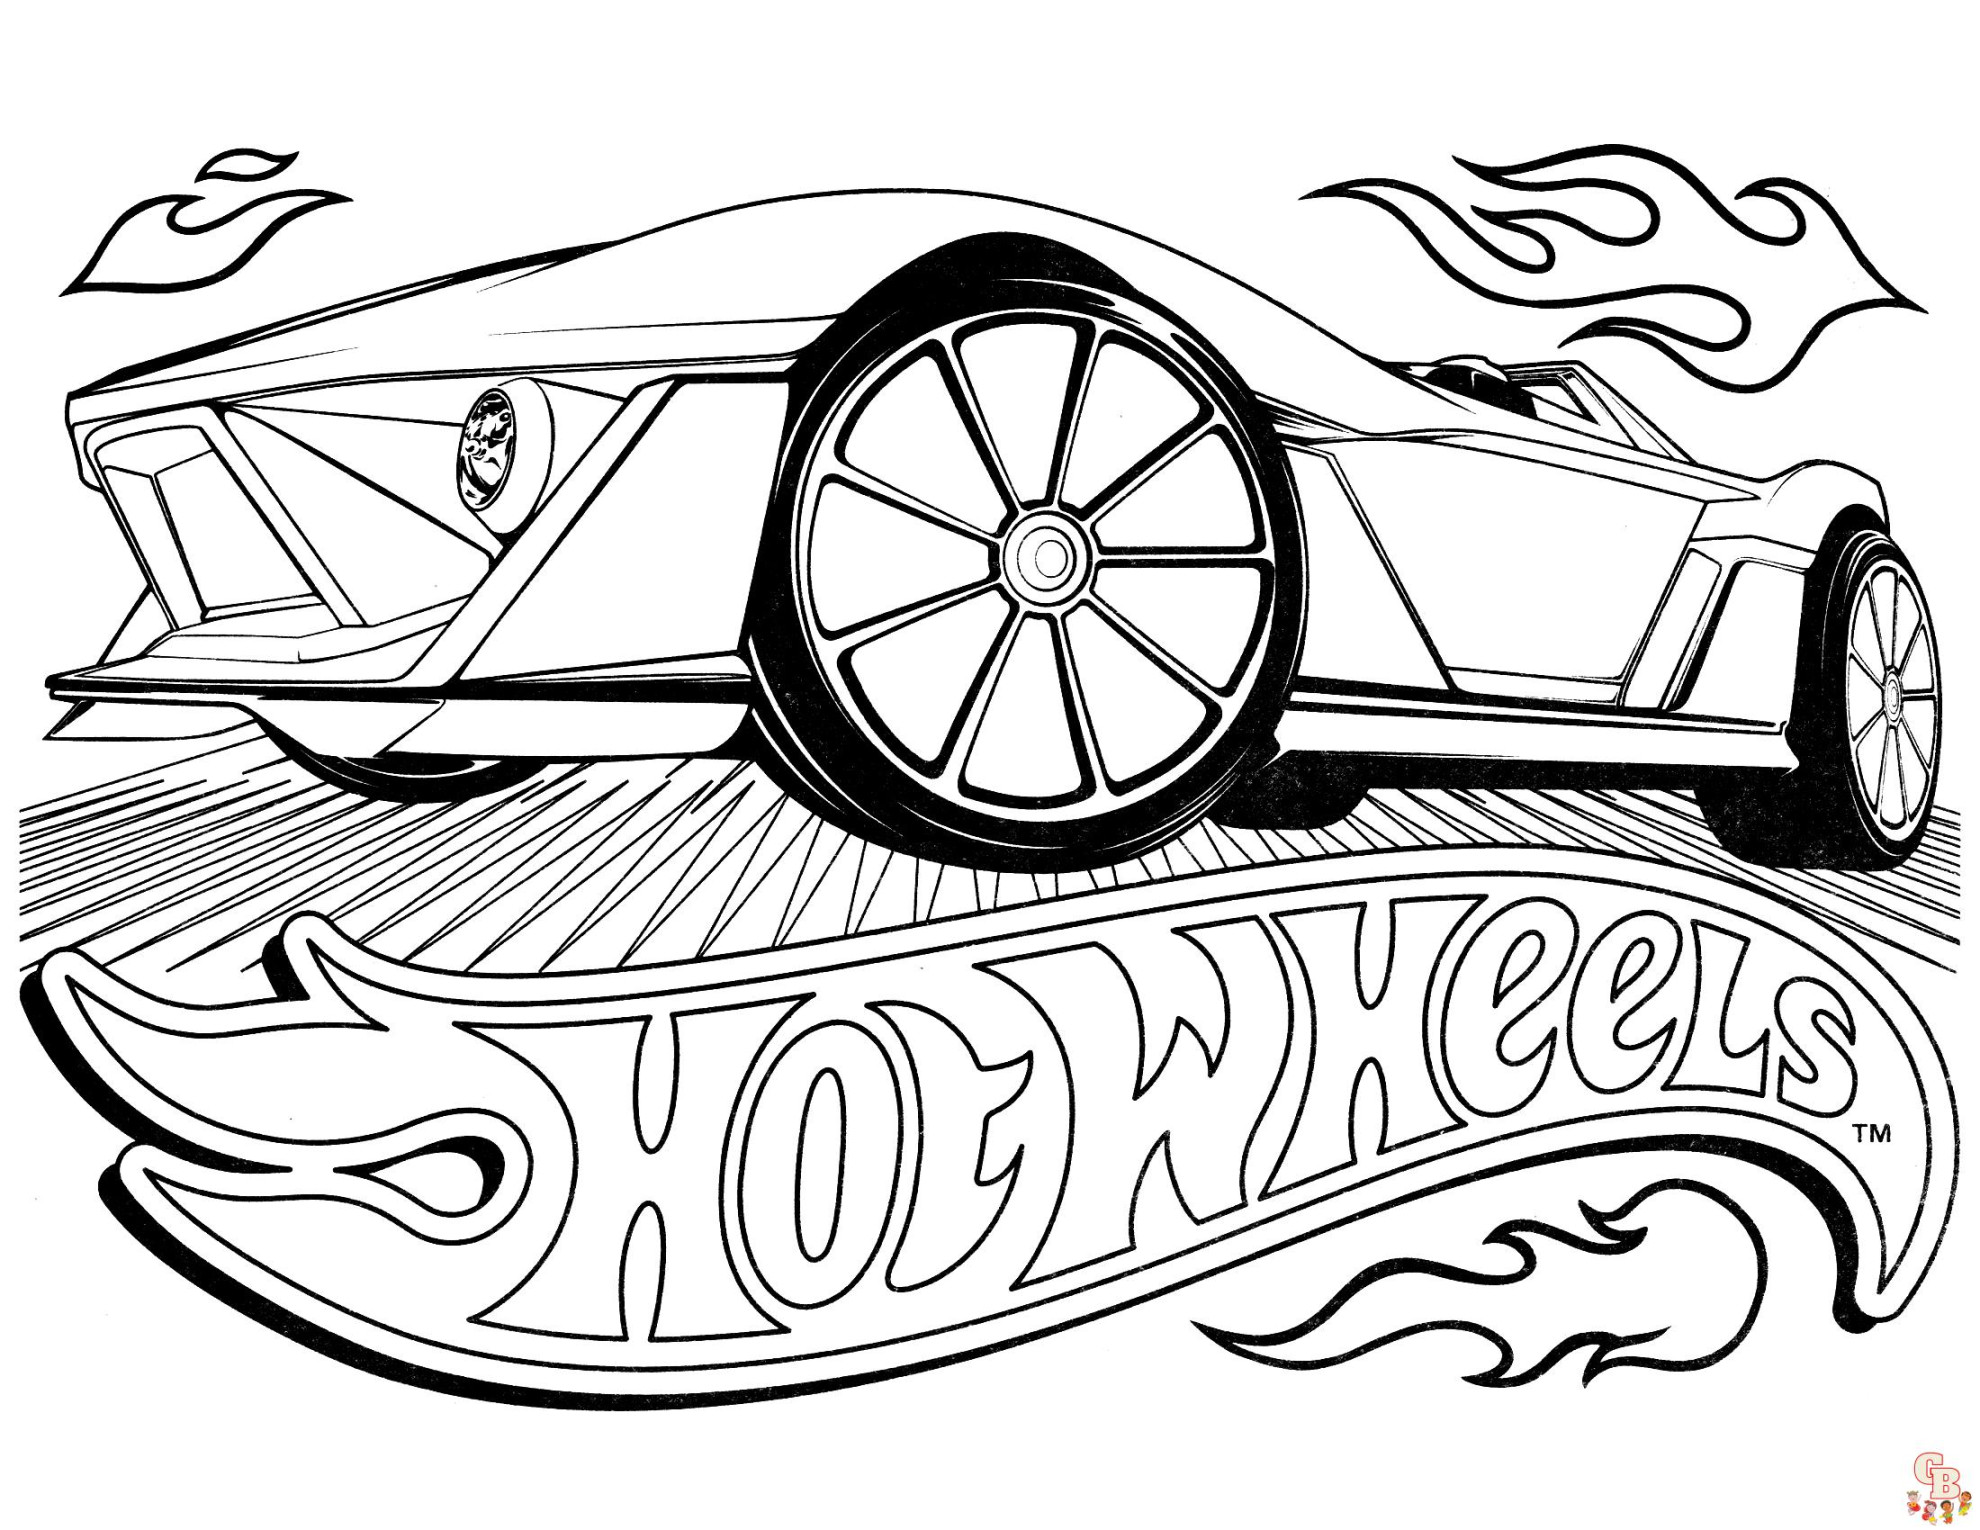 Hotwheels Coloring Pages: Fun and Free Printable Sheets for Kids